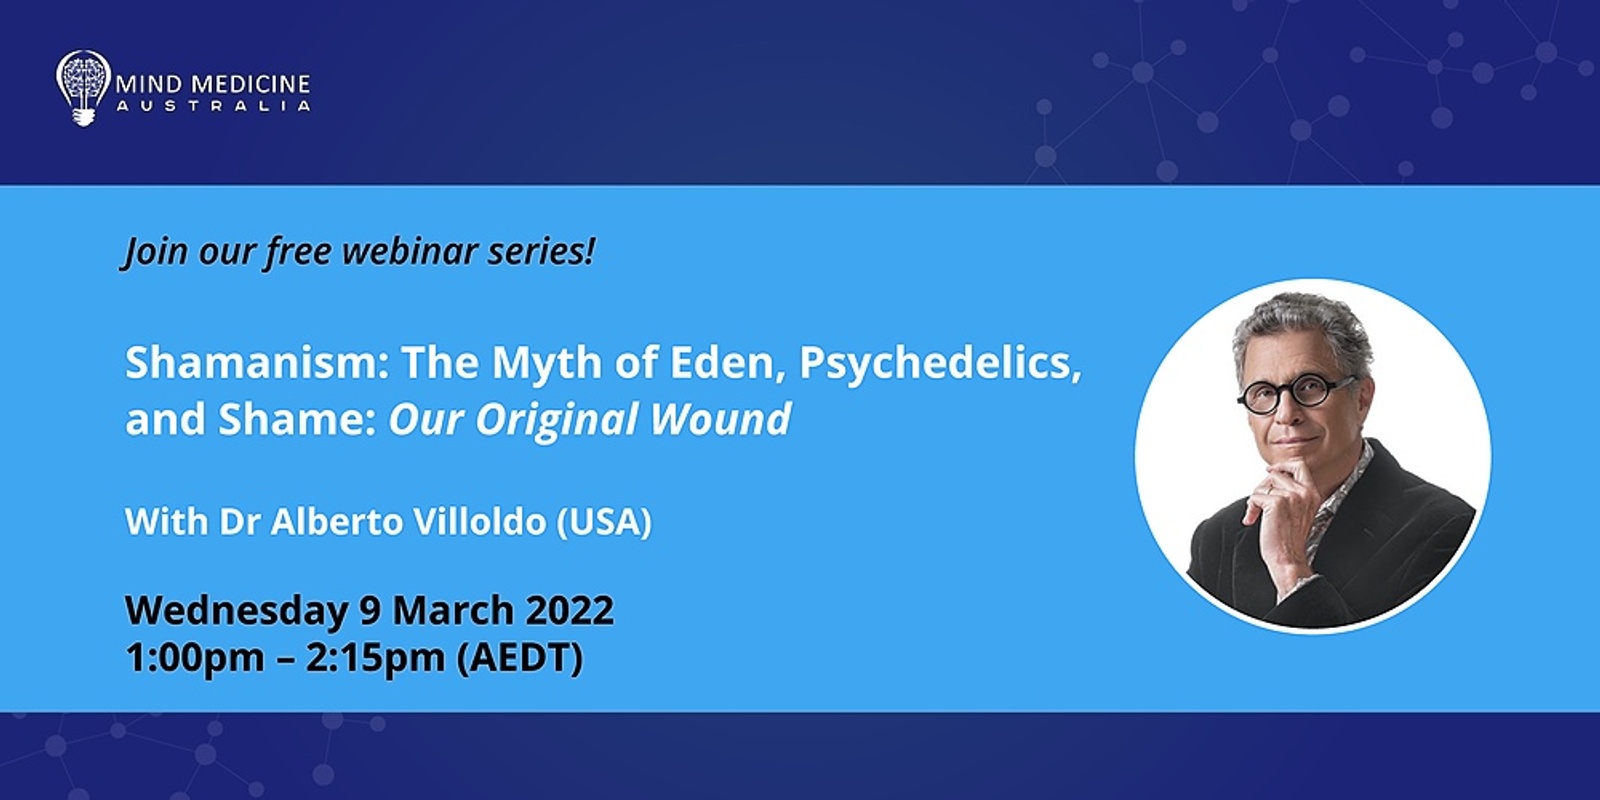 Banner image for MMA FREE Webinar Series - Shamanism: The Myth of Eden, Psychedelics, and Shame - Our Original Wound with Dr Alberto Villoldo (USA)